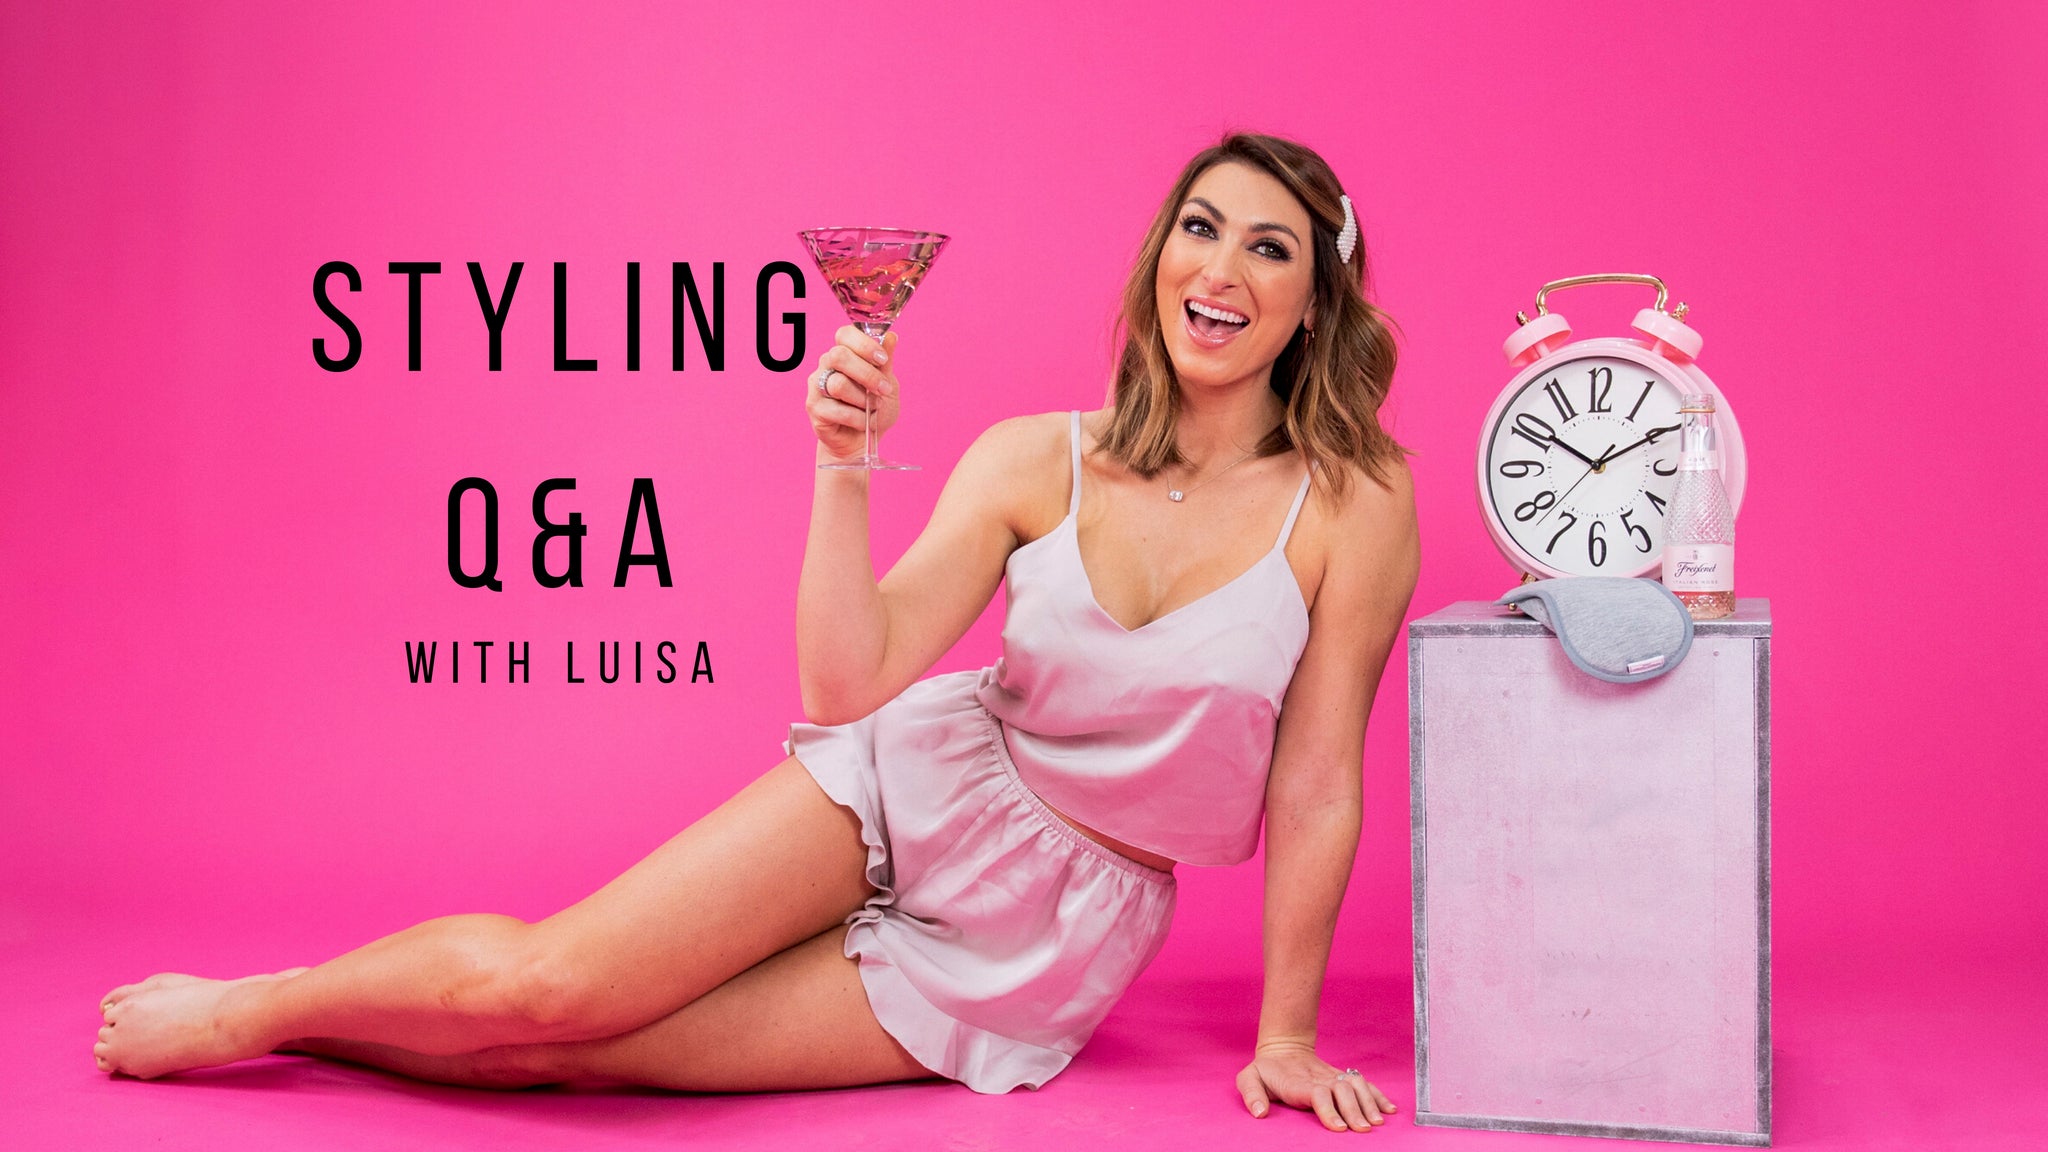 STYLING Q&A WITH LUISA